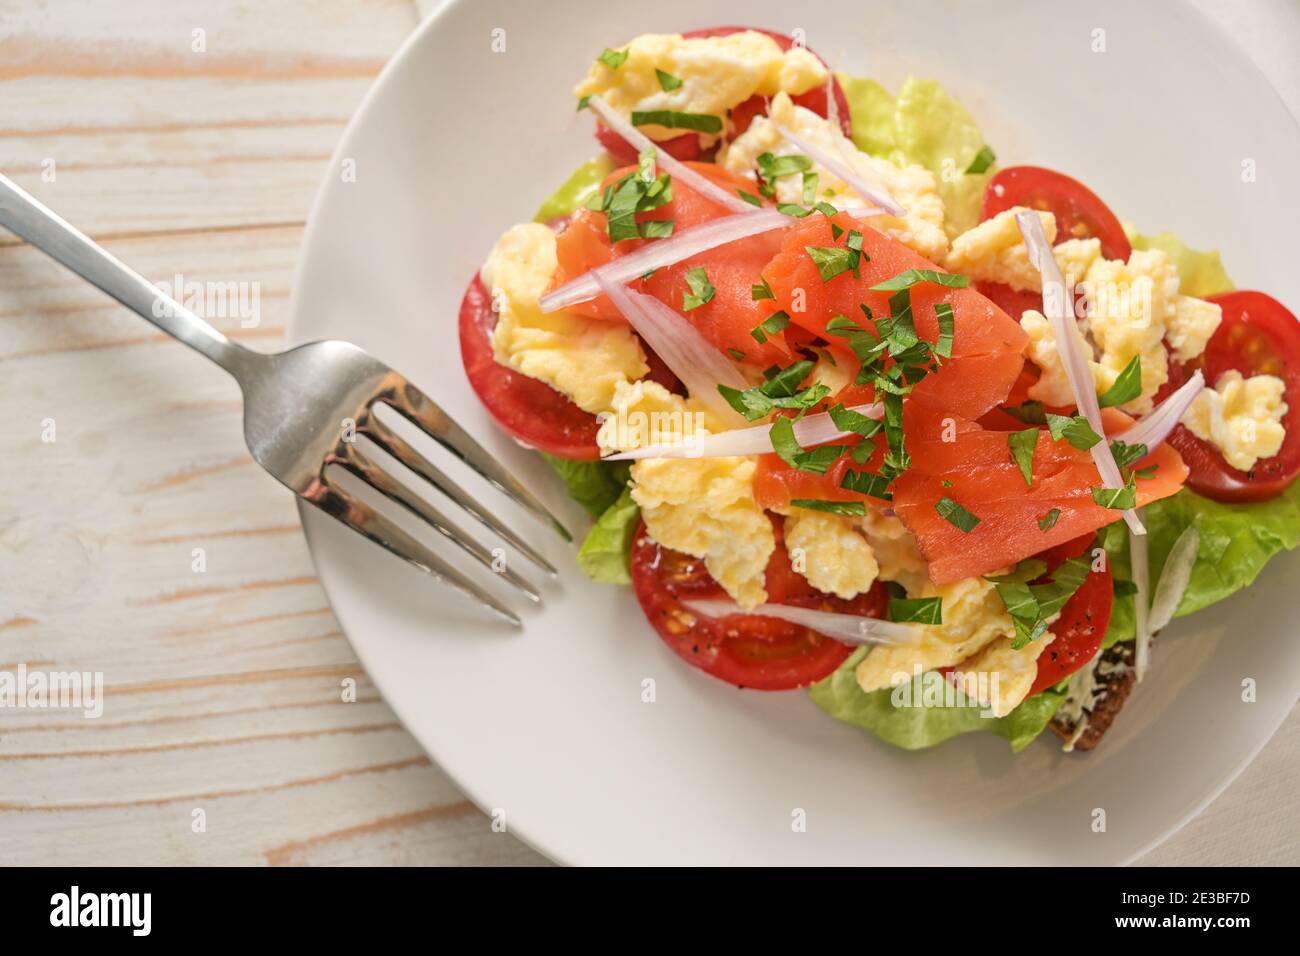 Smoked salmon and scrambled eggs with onion and parsley garnish on whole meal bread with tomatoes and lettuce, healthy sandwich snack on a white plate Stock Photo